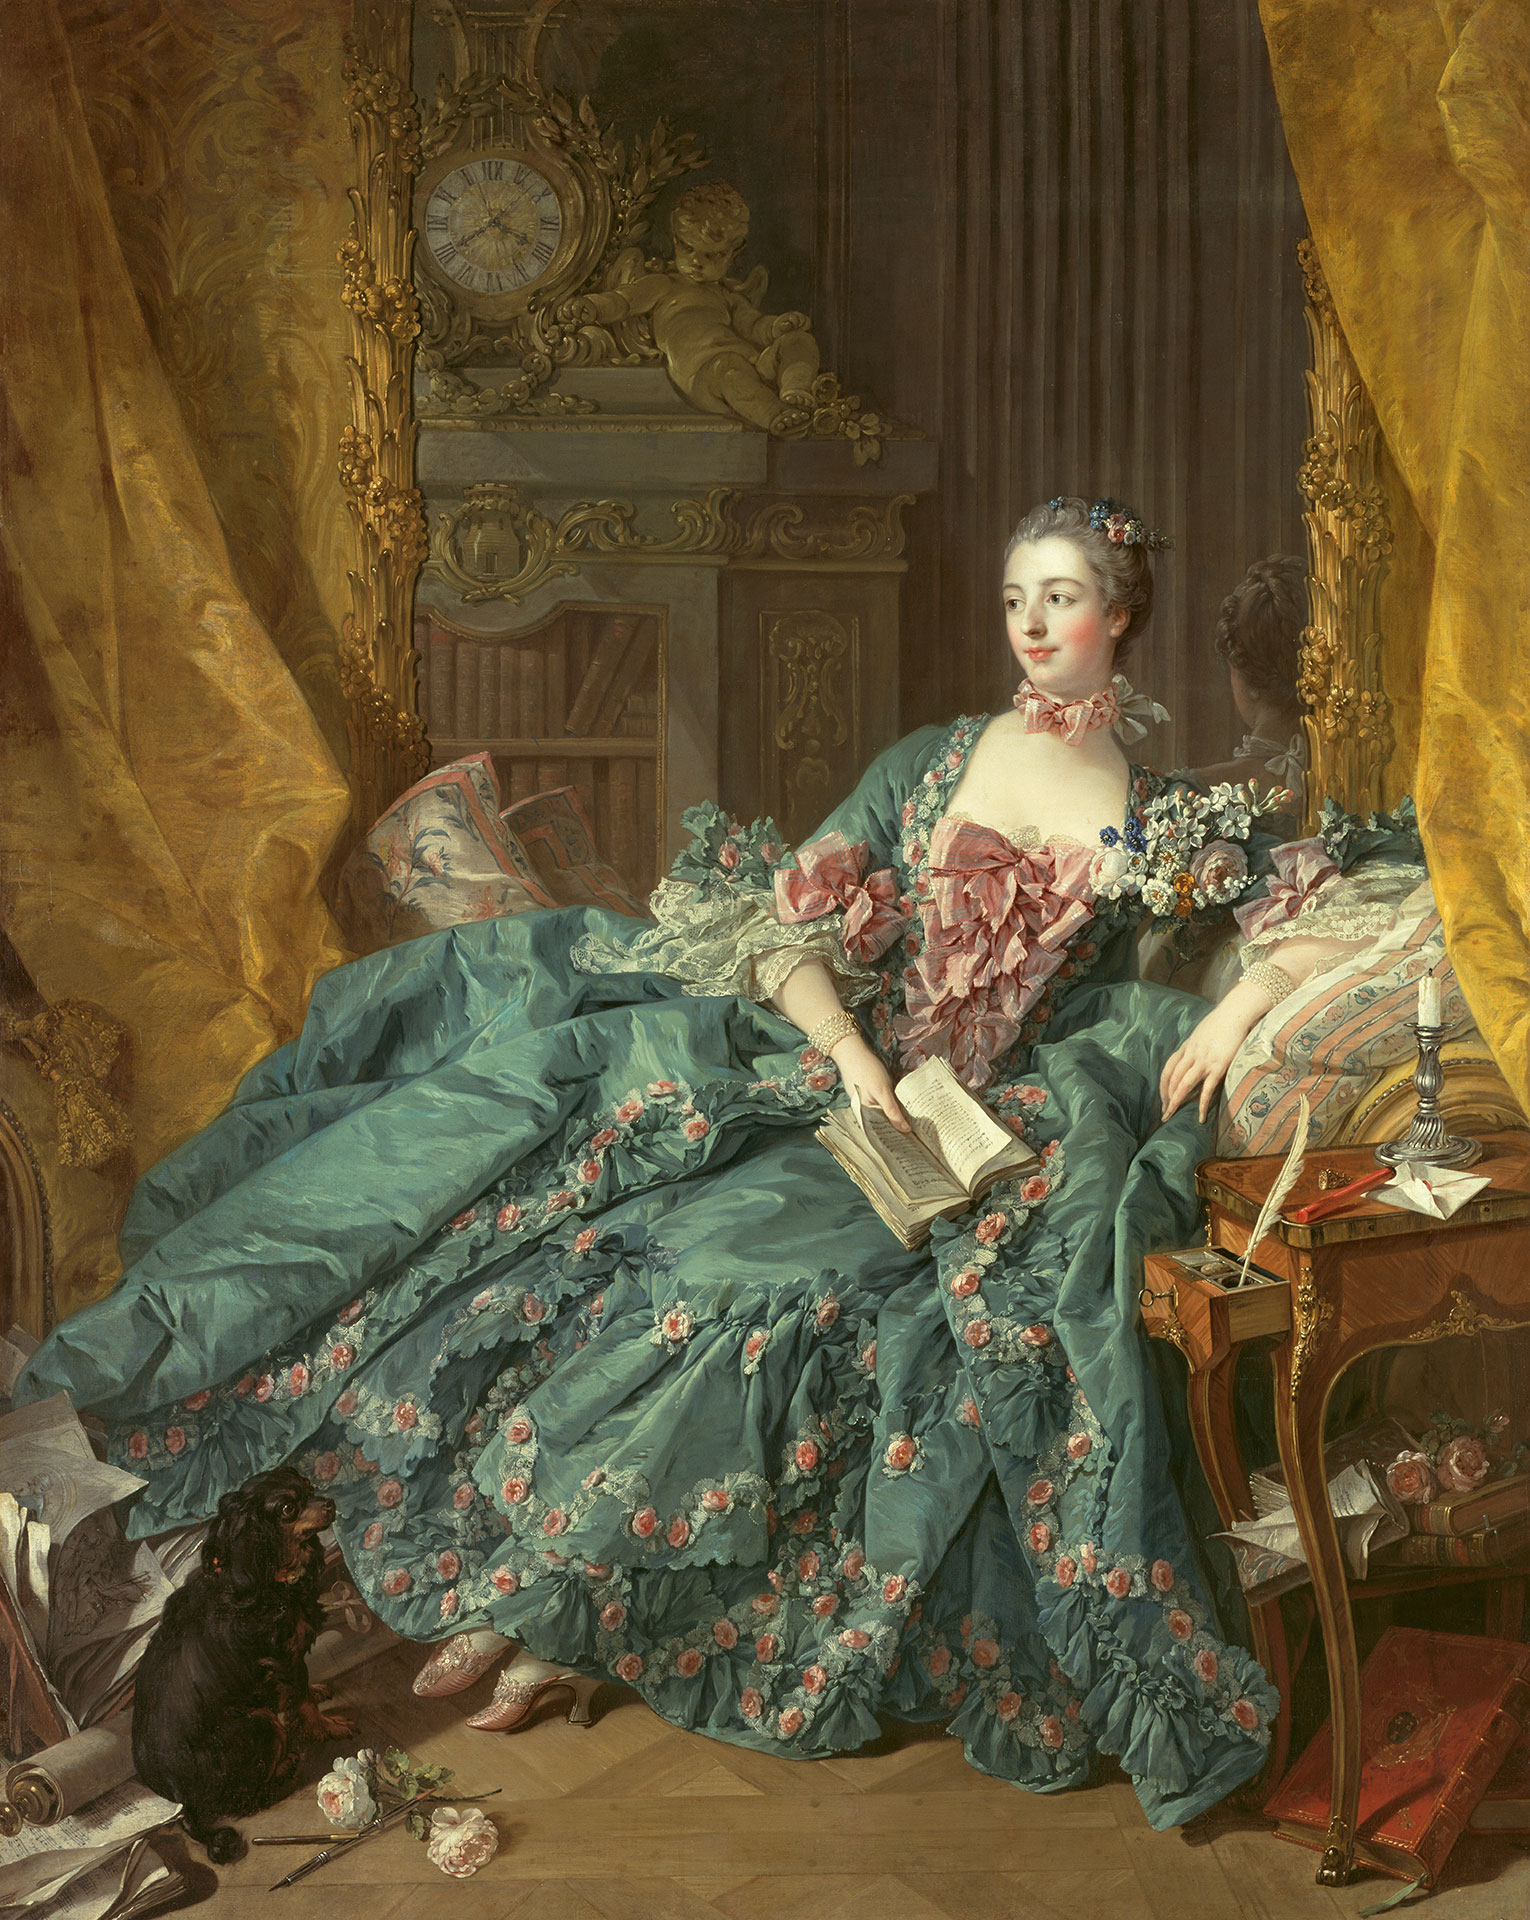 Painting Portrait of Madame de Pompadour by François Boucher, created in 1756. It shows Madame Pompadour in a blue dress resting on an armchair. In her right hand she is holding an open book.